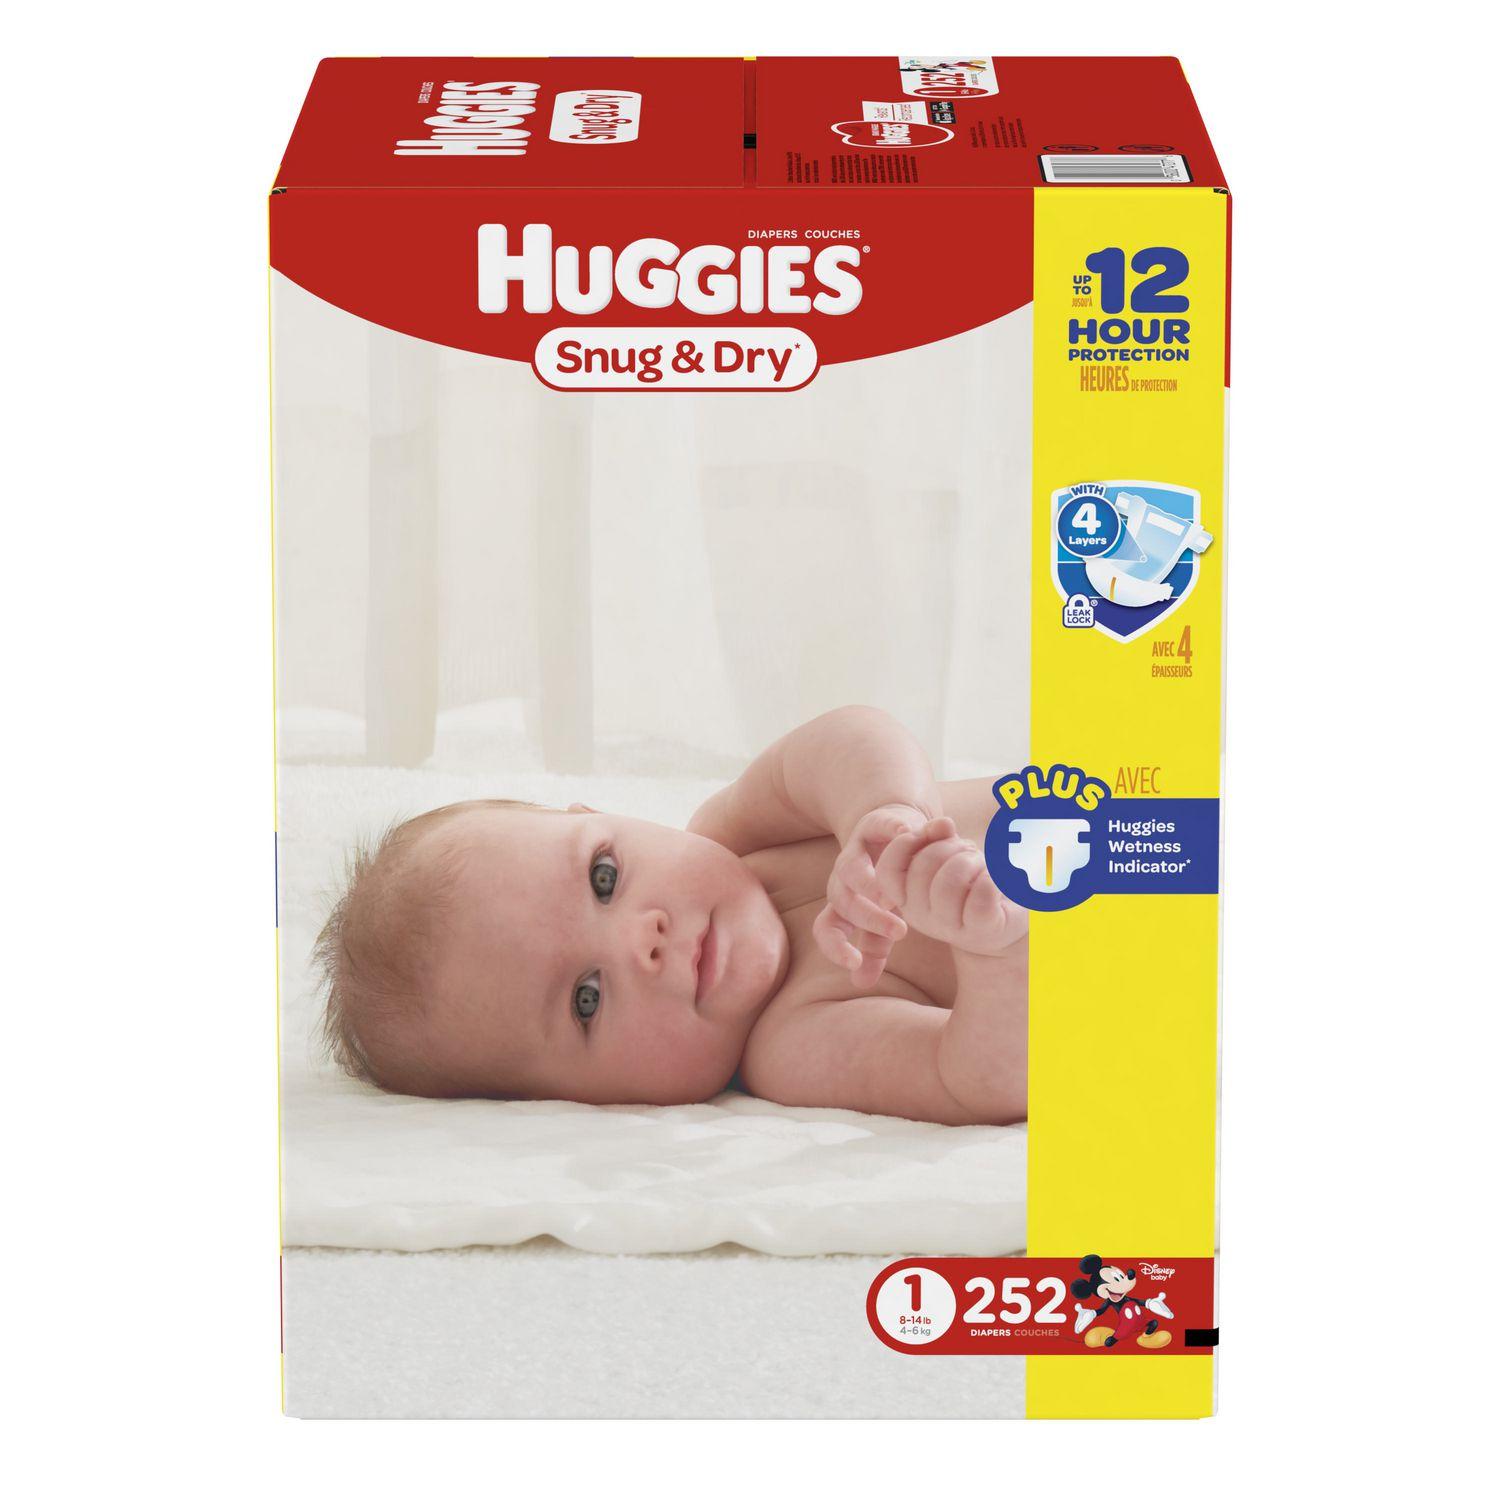 Huggies Snug & Dry Diapers, Size 1, 252 Count